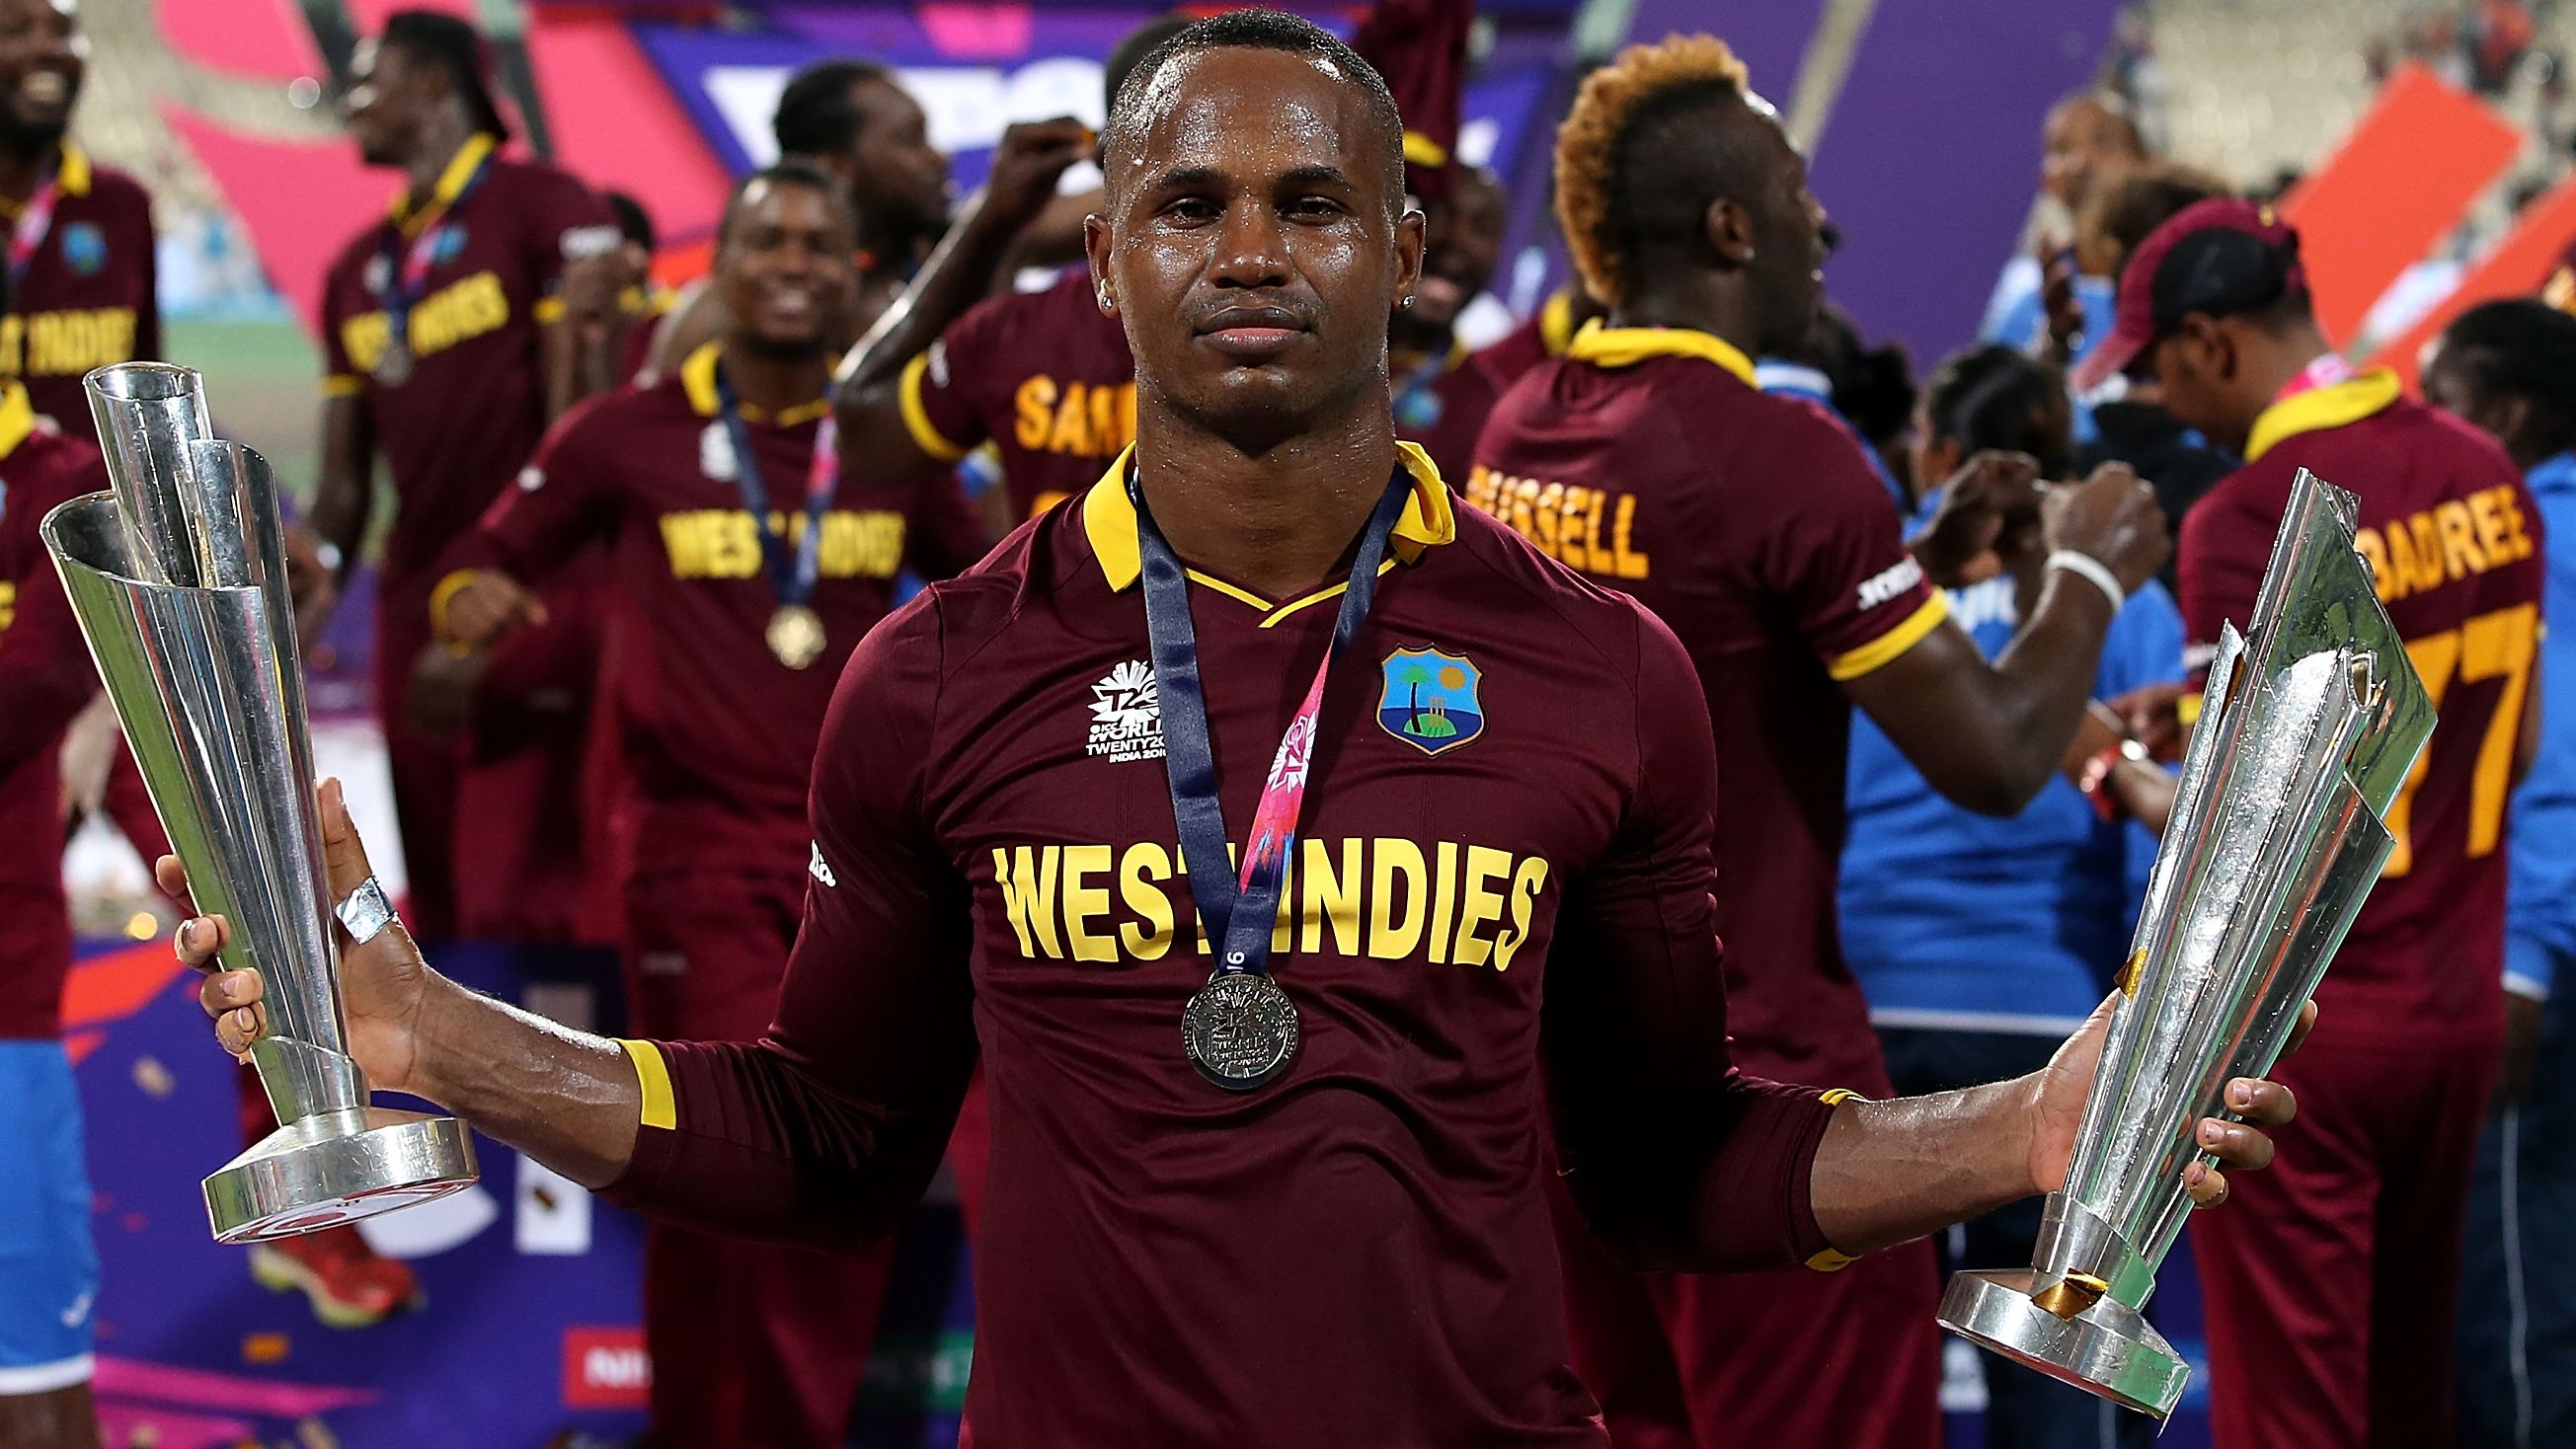 Marlon Samuels during the ICC World Twenty20 India 2016 final match between England and West Indies at Eden Gardens on April 3, 2016 in Kolkata, India.